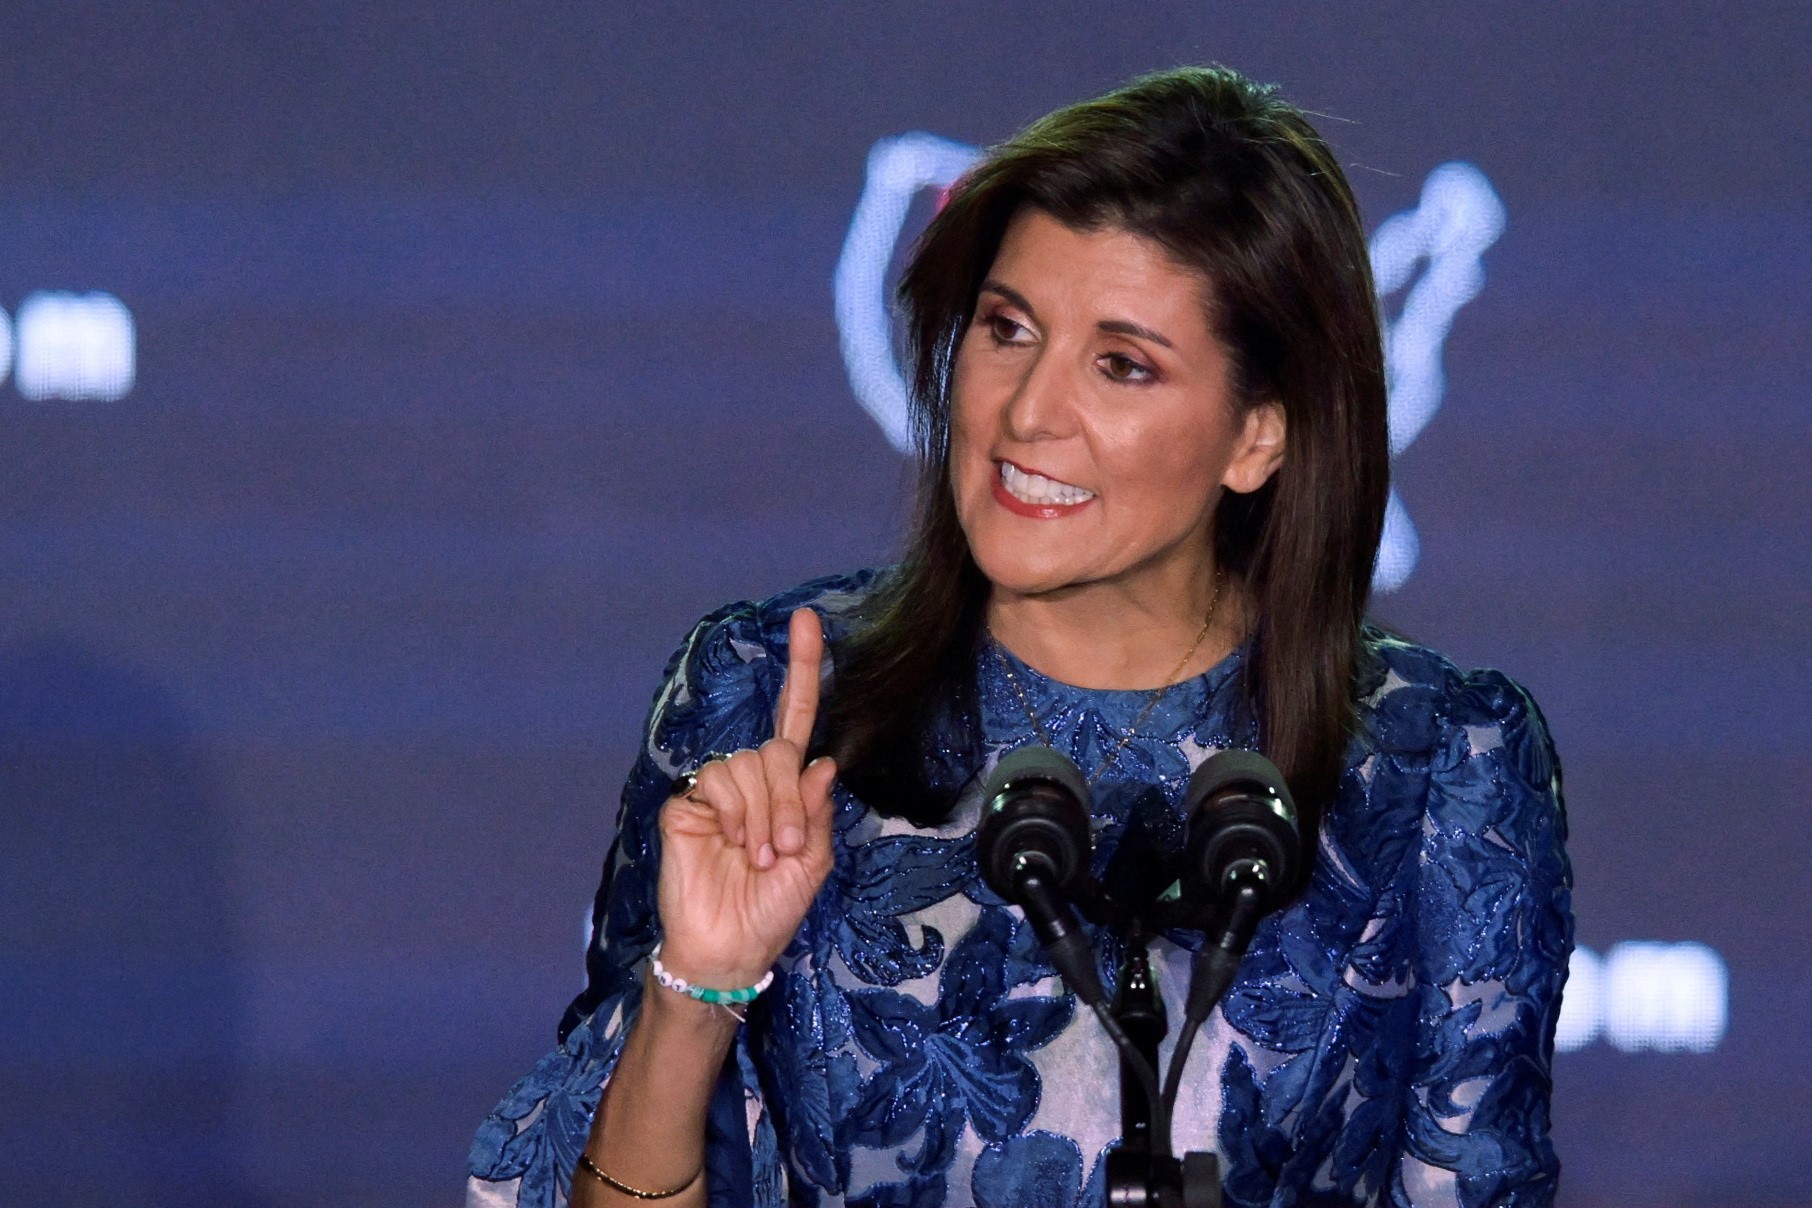 Nikki Haley speaks on stage and holds up her right index finger.